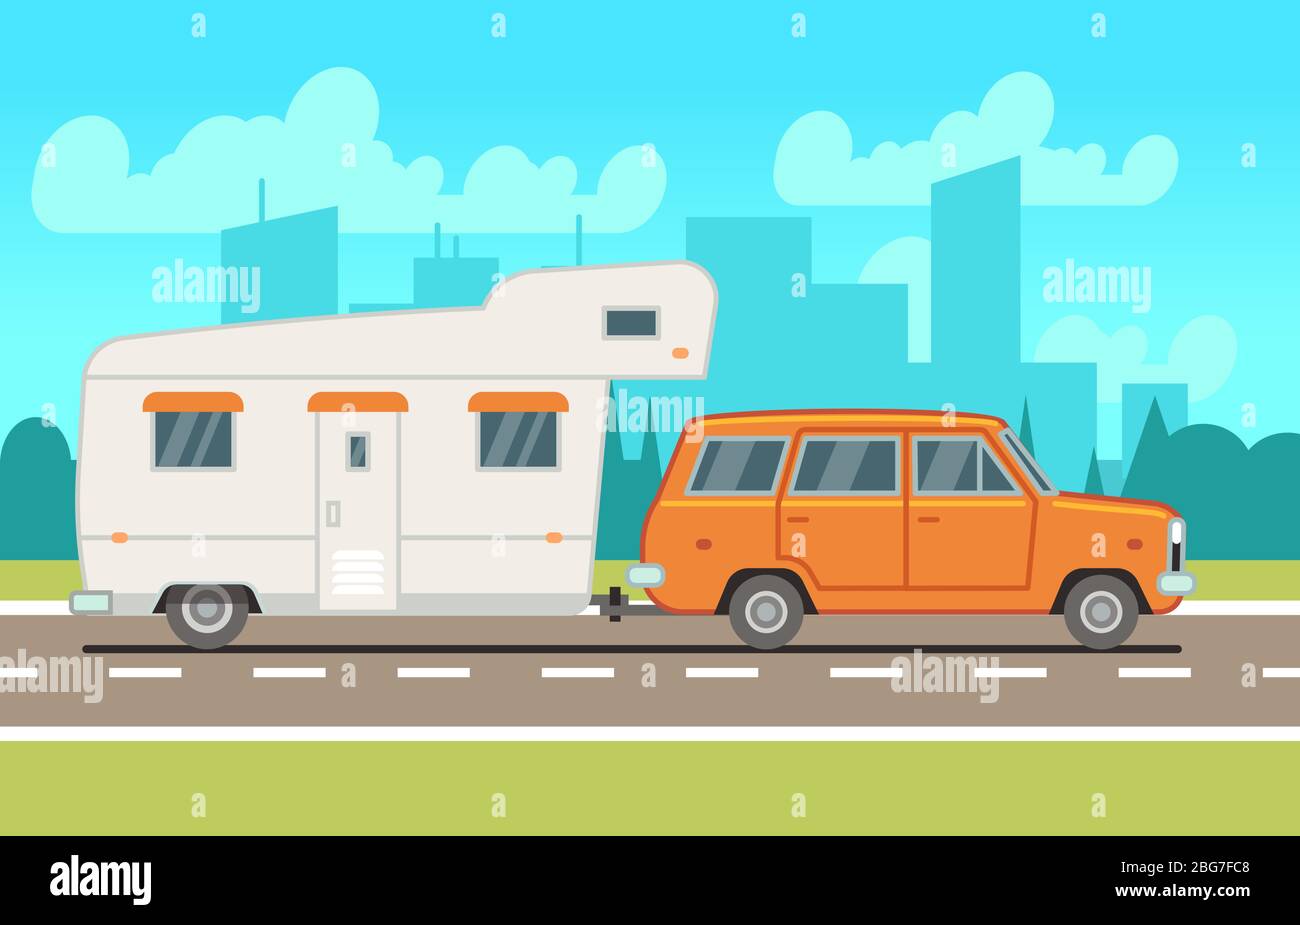 Family rv camping trailer on road. Country traveling and outdoor vacation vector concept. Transport for journey, motorhome truck for travel illustrati Stock Vector